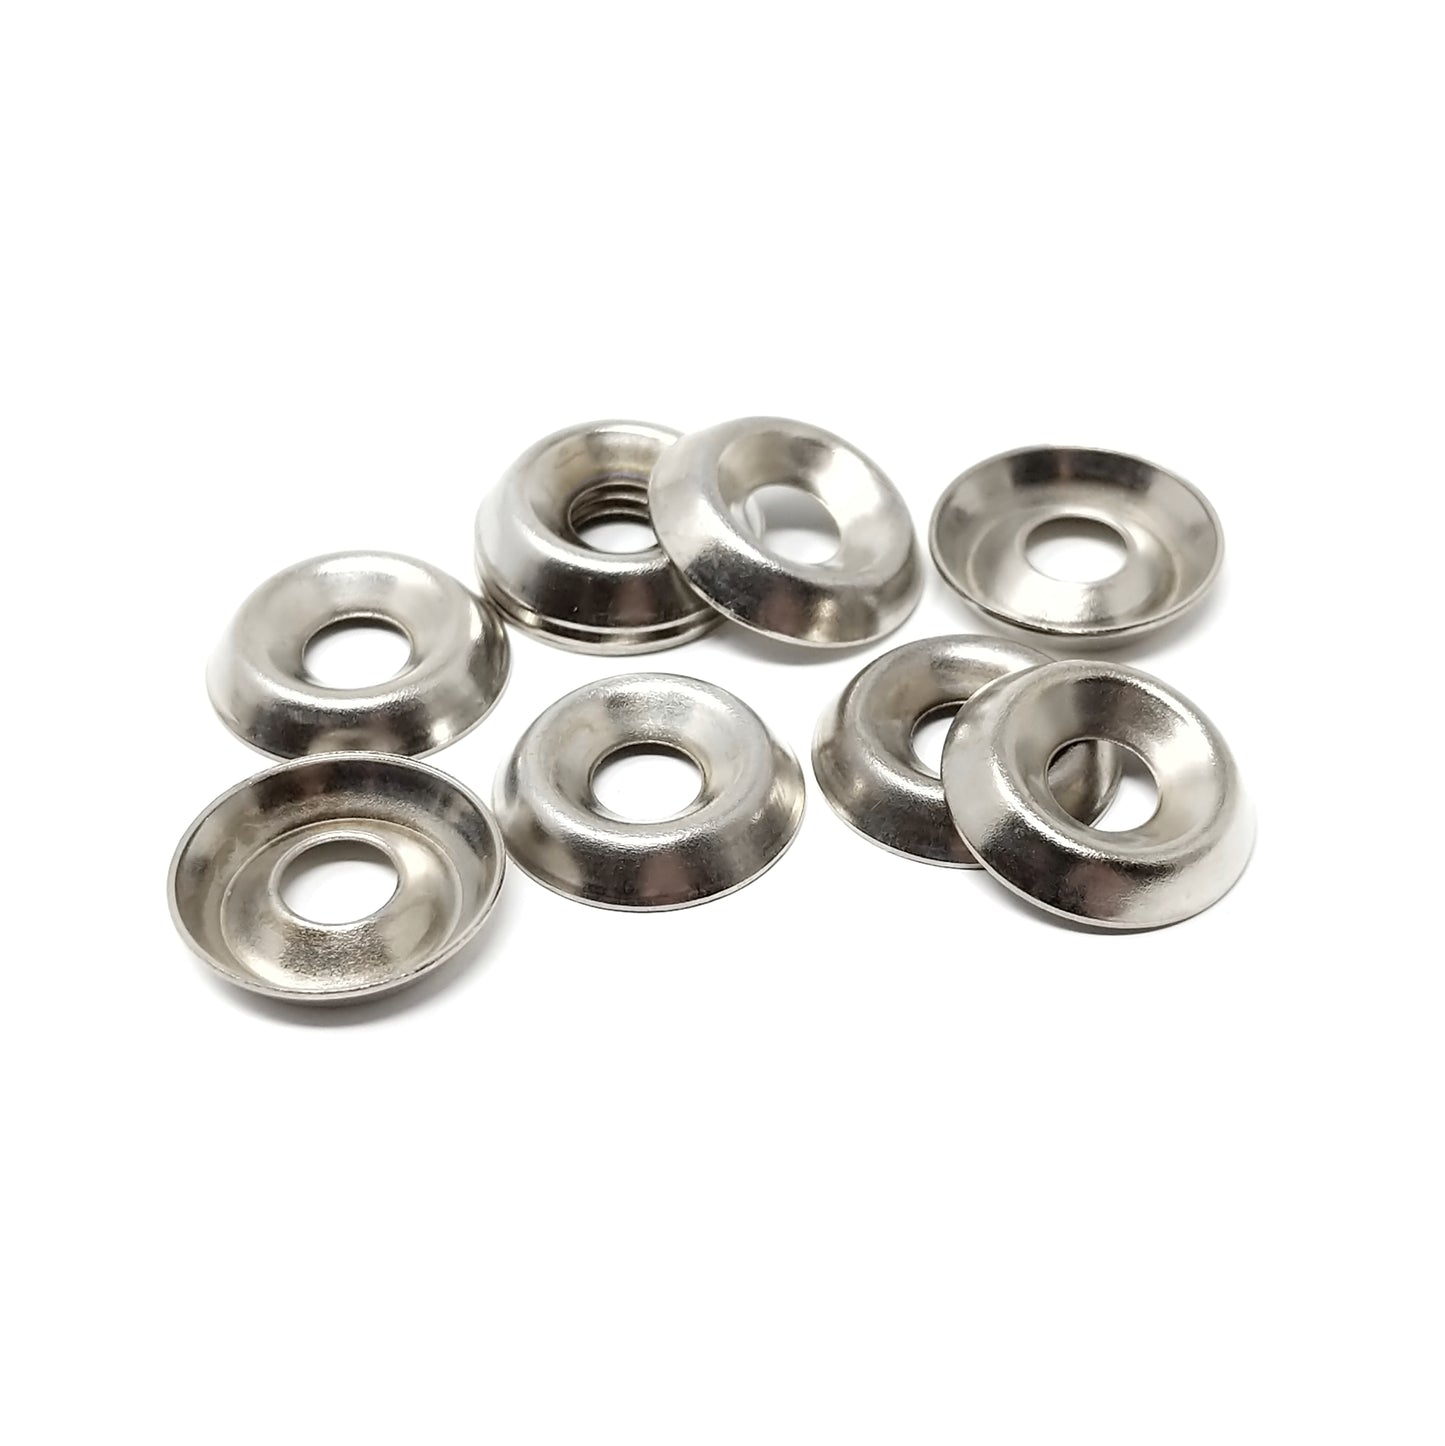 5.2mm Rosette Washers For Screws - Nickel Plated Steel, Made In Germany - Keay Vital Parts